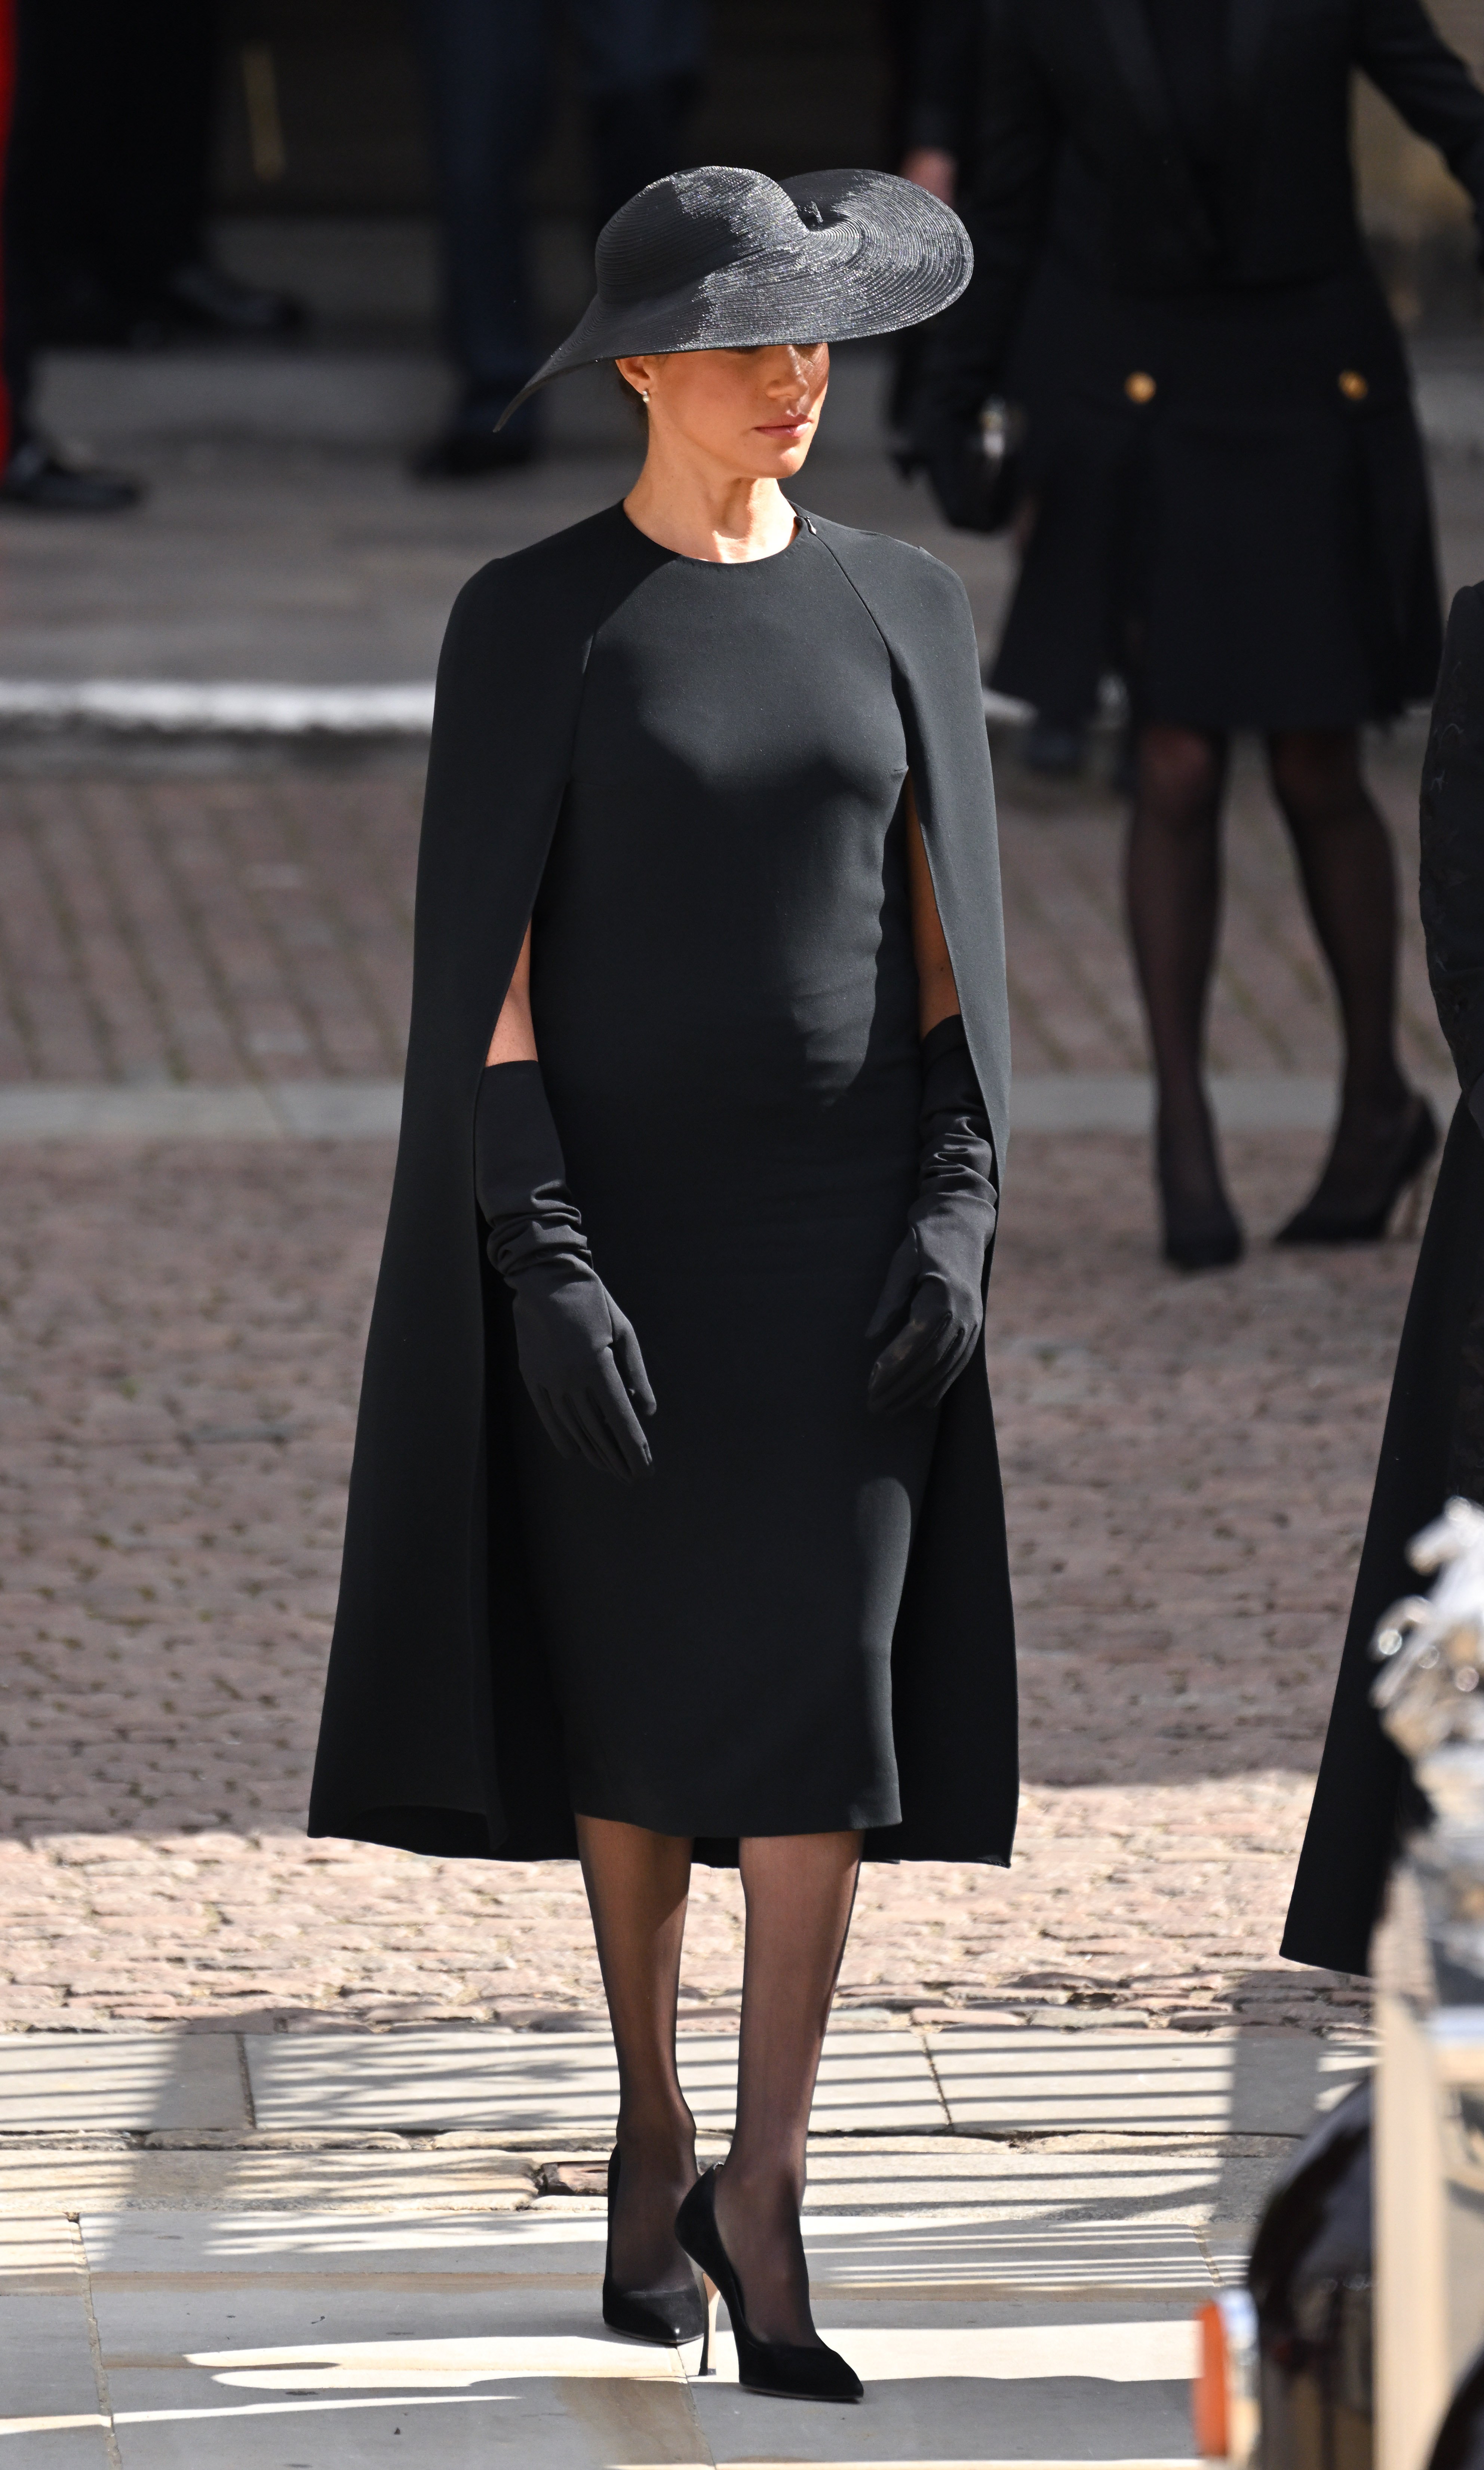 Duchess Meghan during the State Funeral of Queen Elizabeth II at Westminster Abbey on September 19, 2022, in London, England | Source: Getty Images